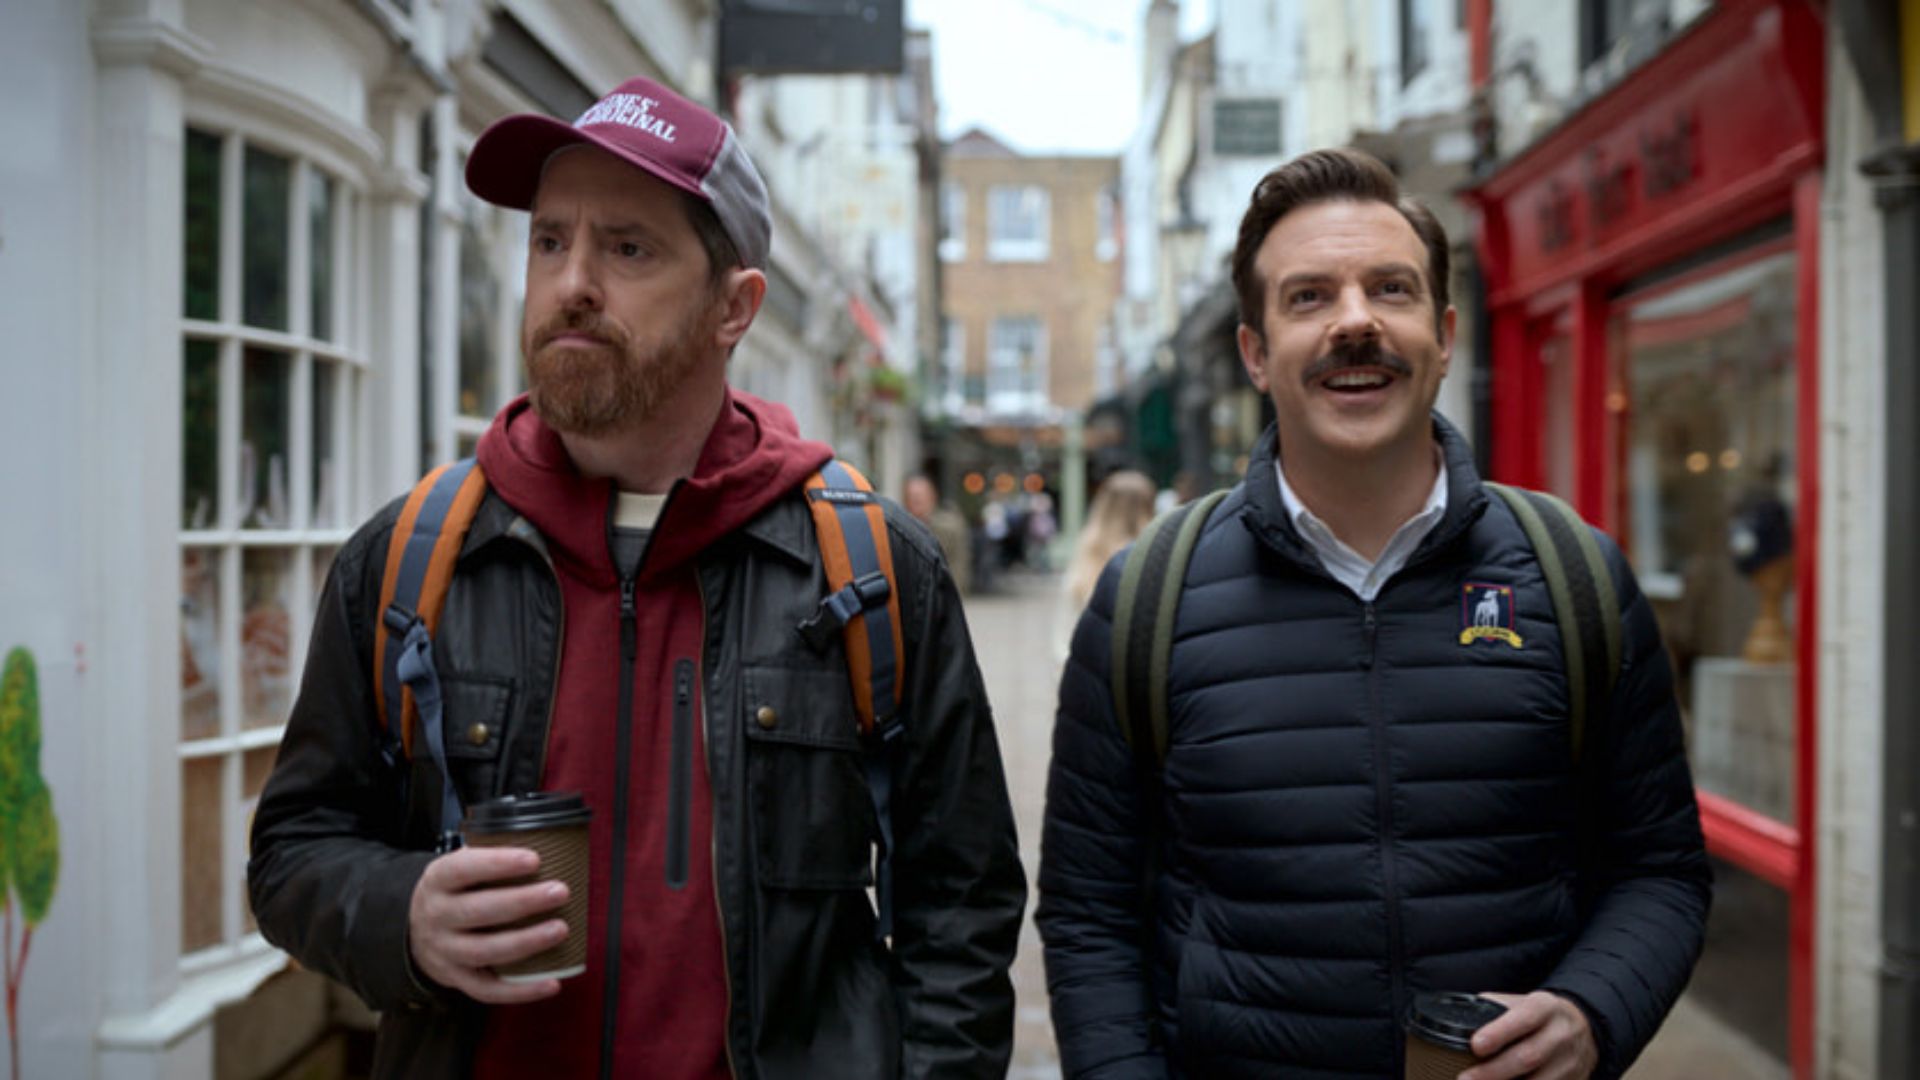 Jason Sudeikis With The Apple TV+ 'Ted Lasso' Team In London – Deadline